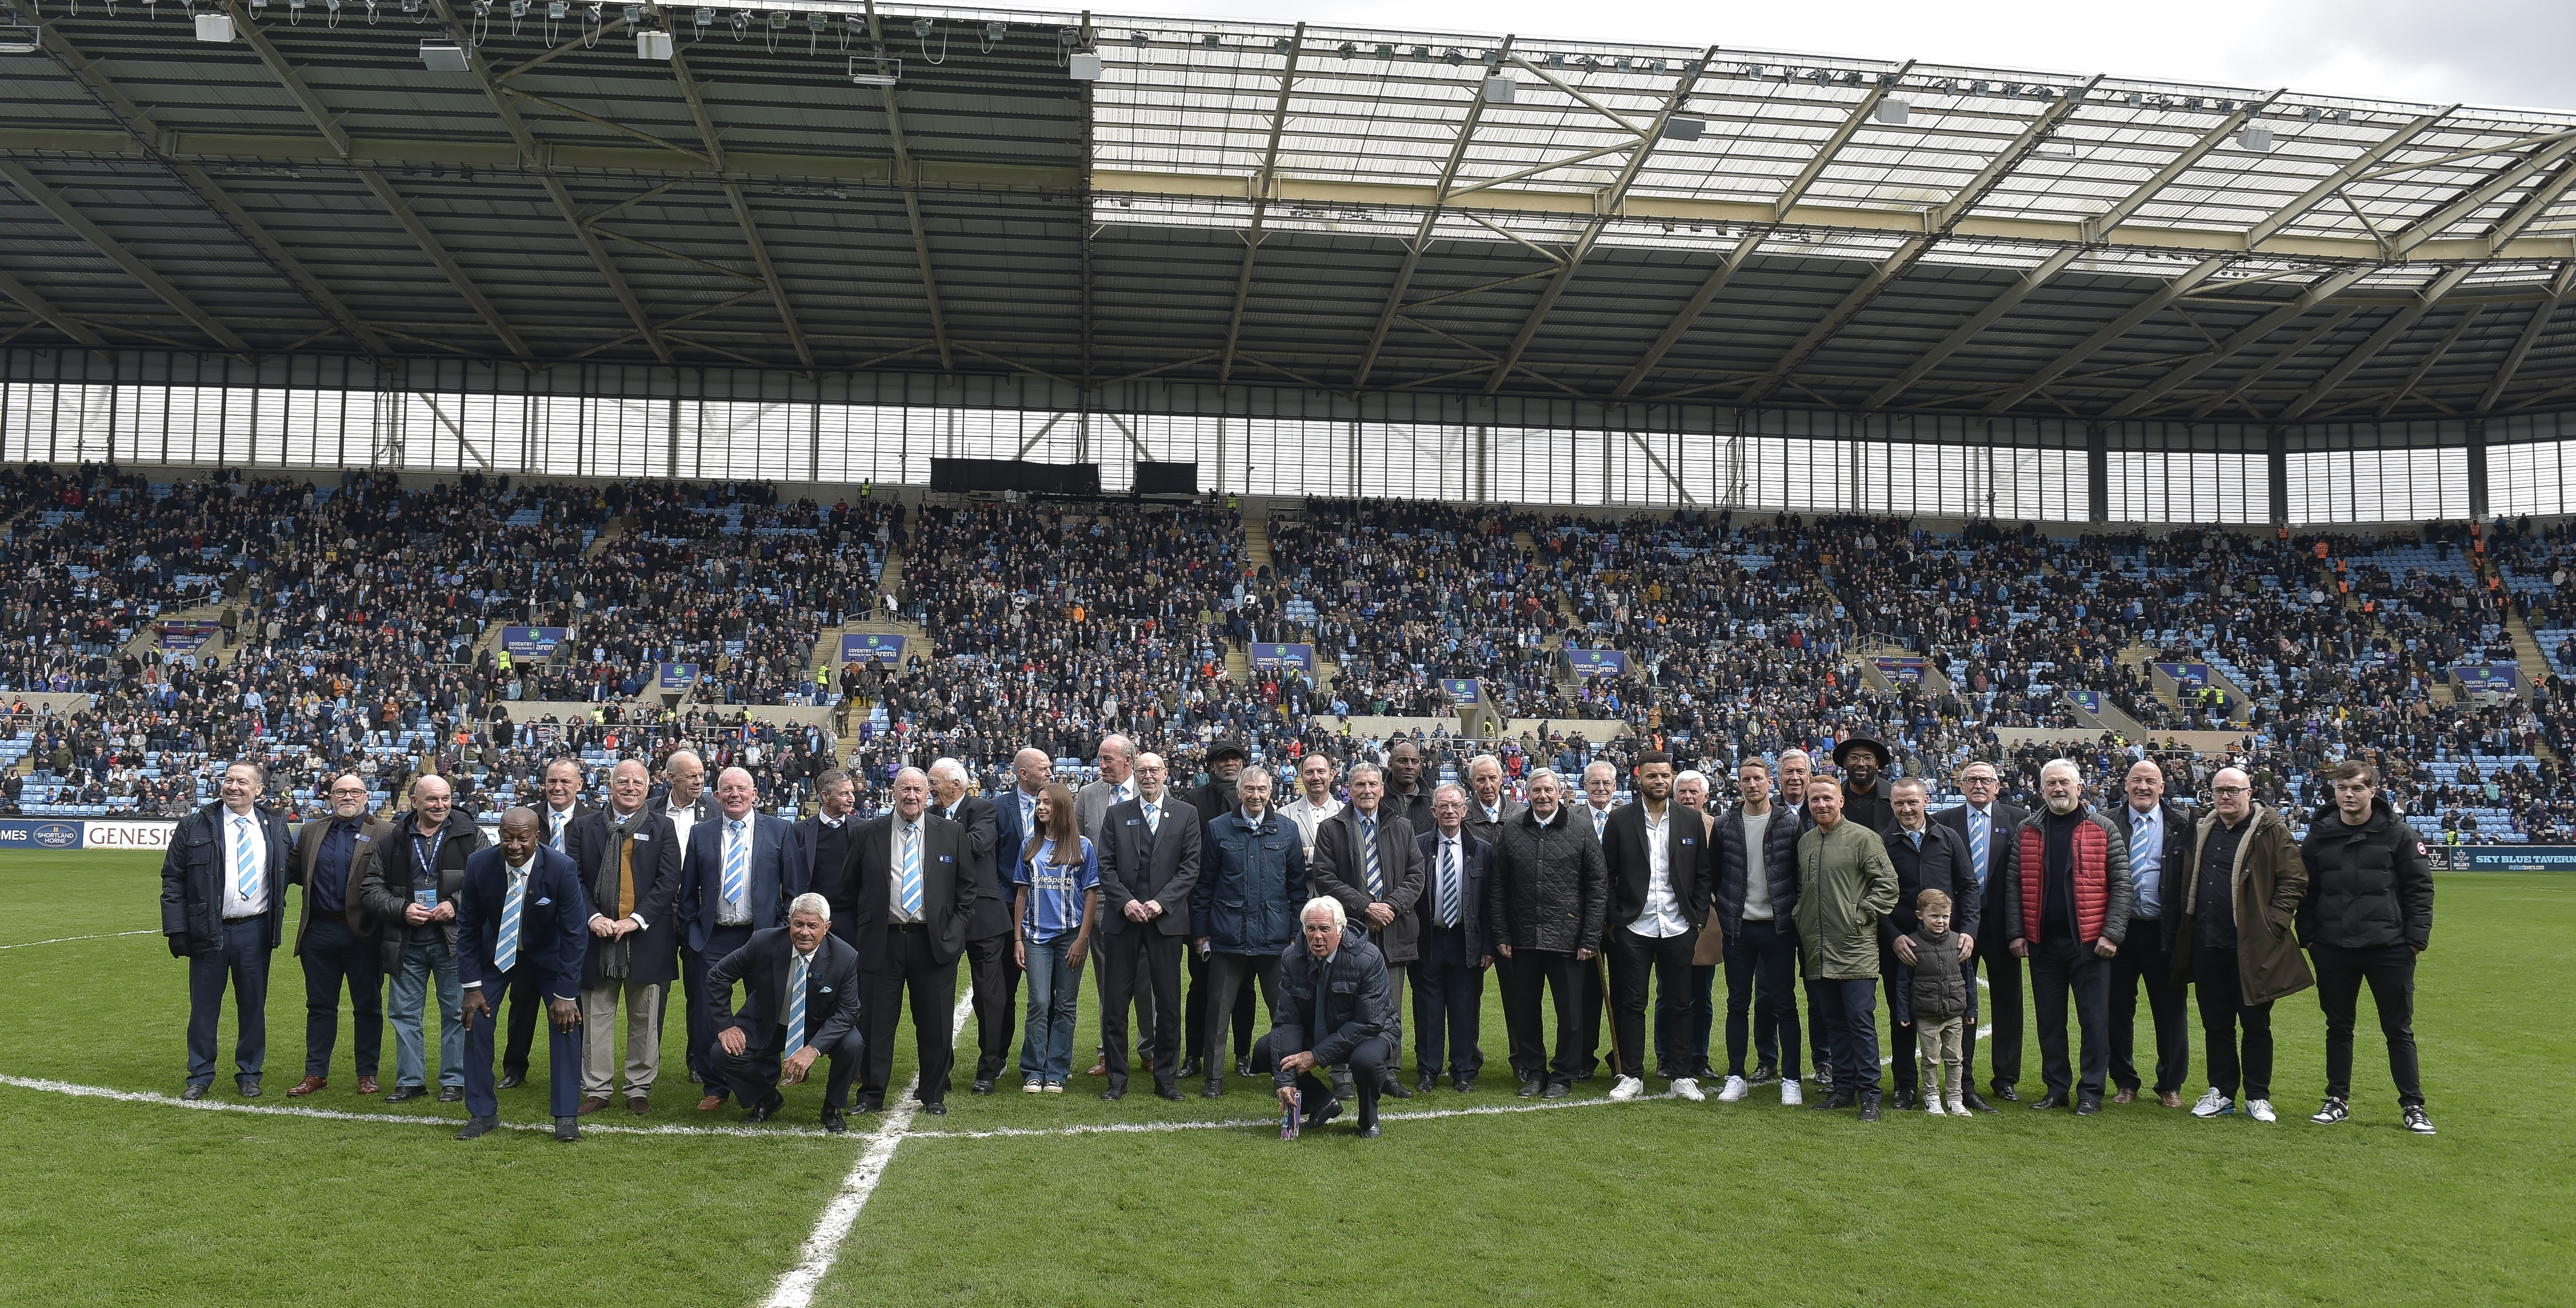 Coventry City's present and future are haunted by 'curse' of the CBS Arena, Coventry City